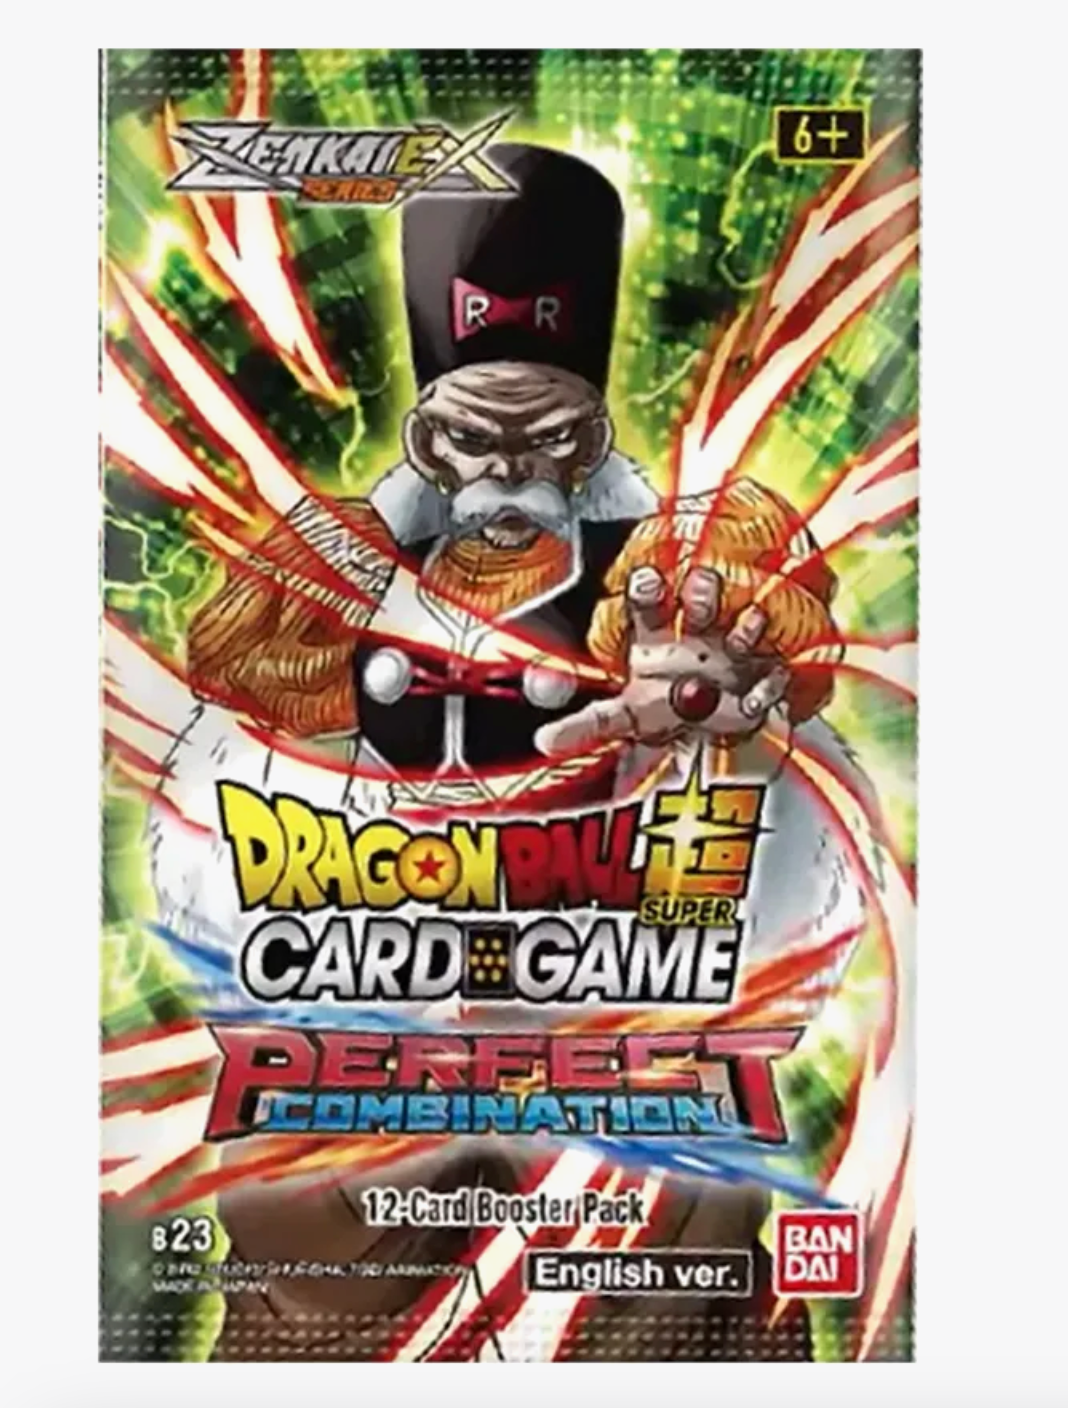 Dragon Ball Super TCG: Perfect Combination Booster Pack